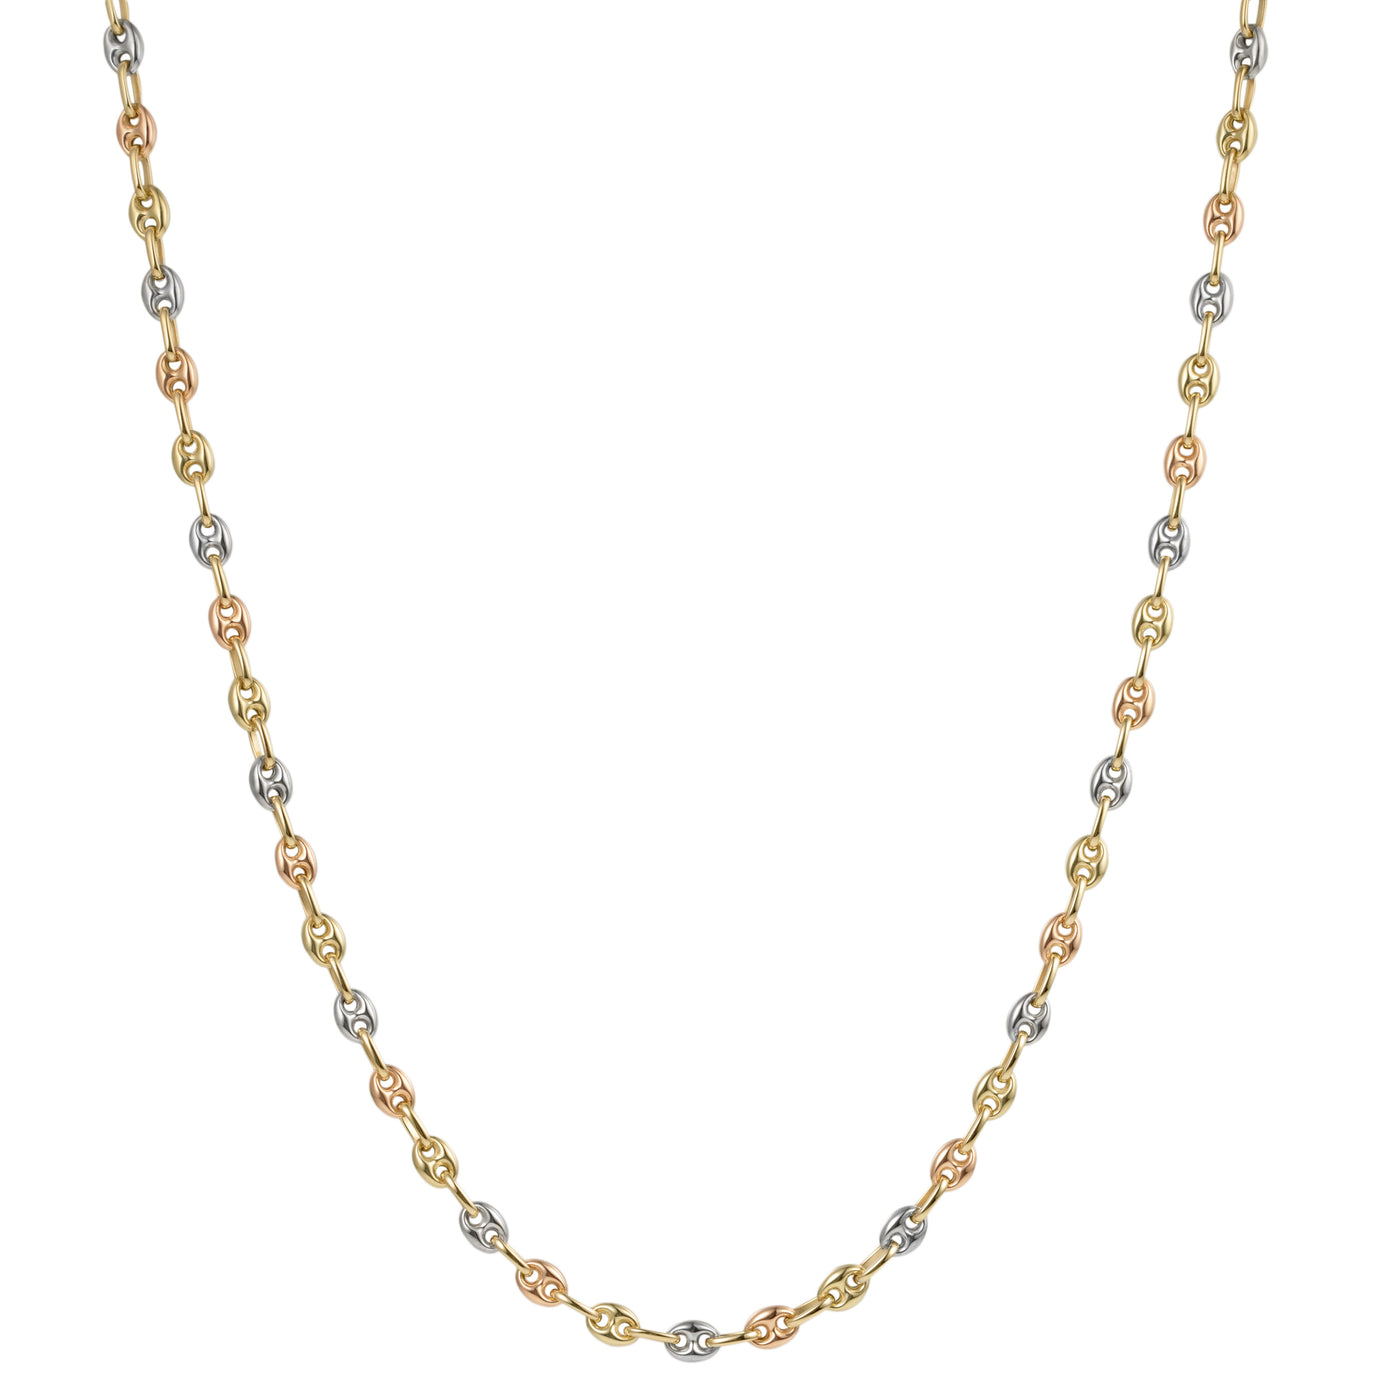 5mm Puffed Gucci Link Chain Necklace 14K Tri-Color Gold